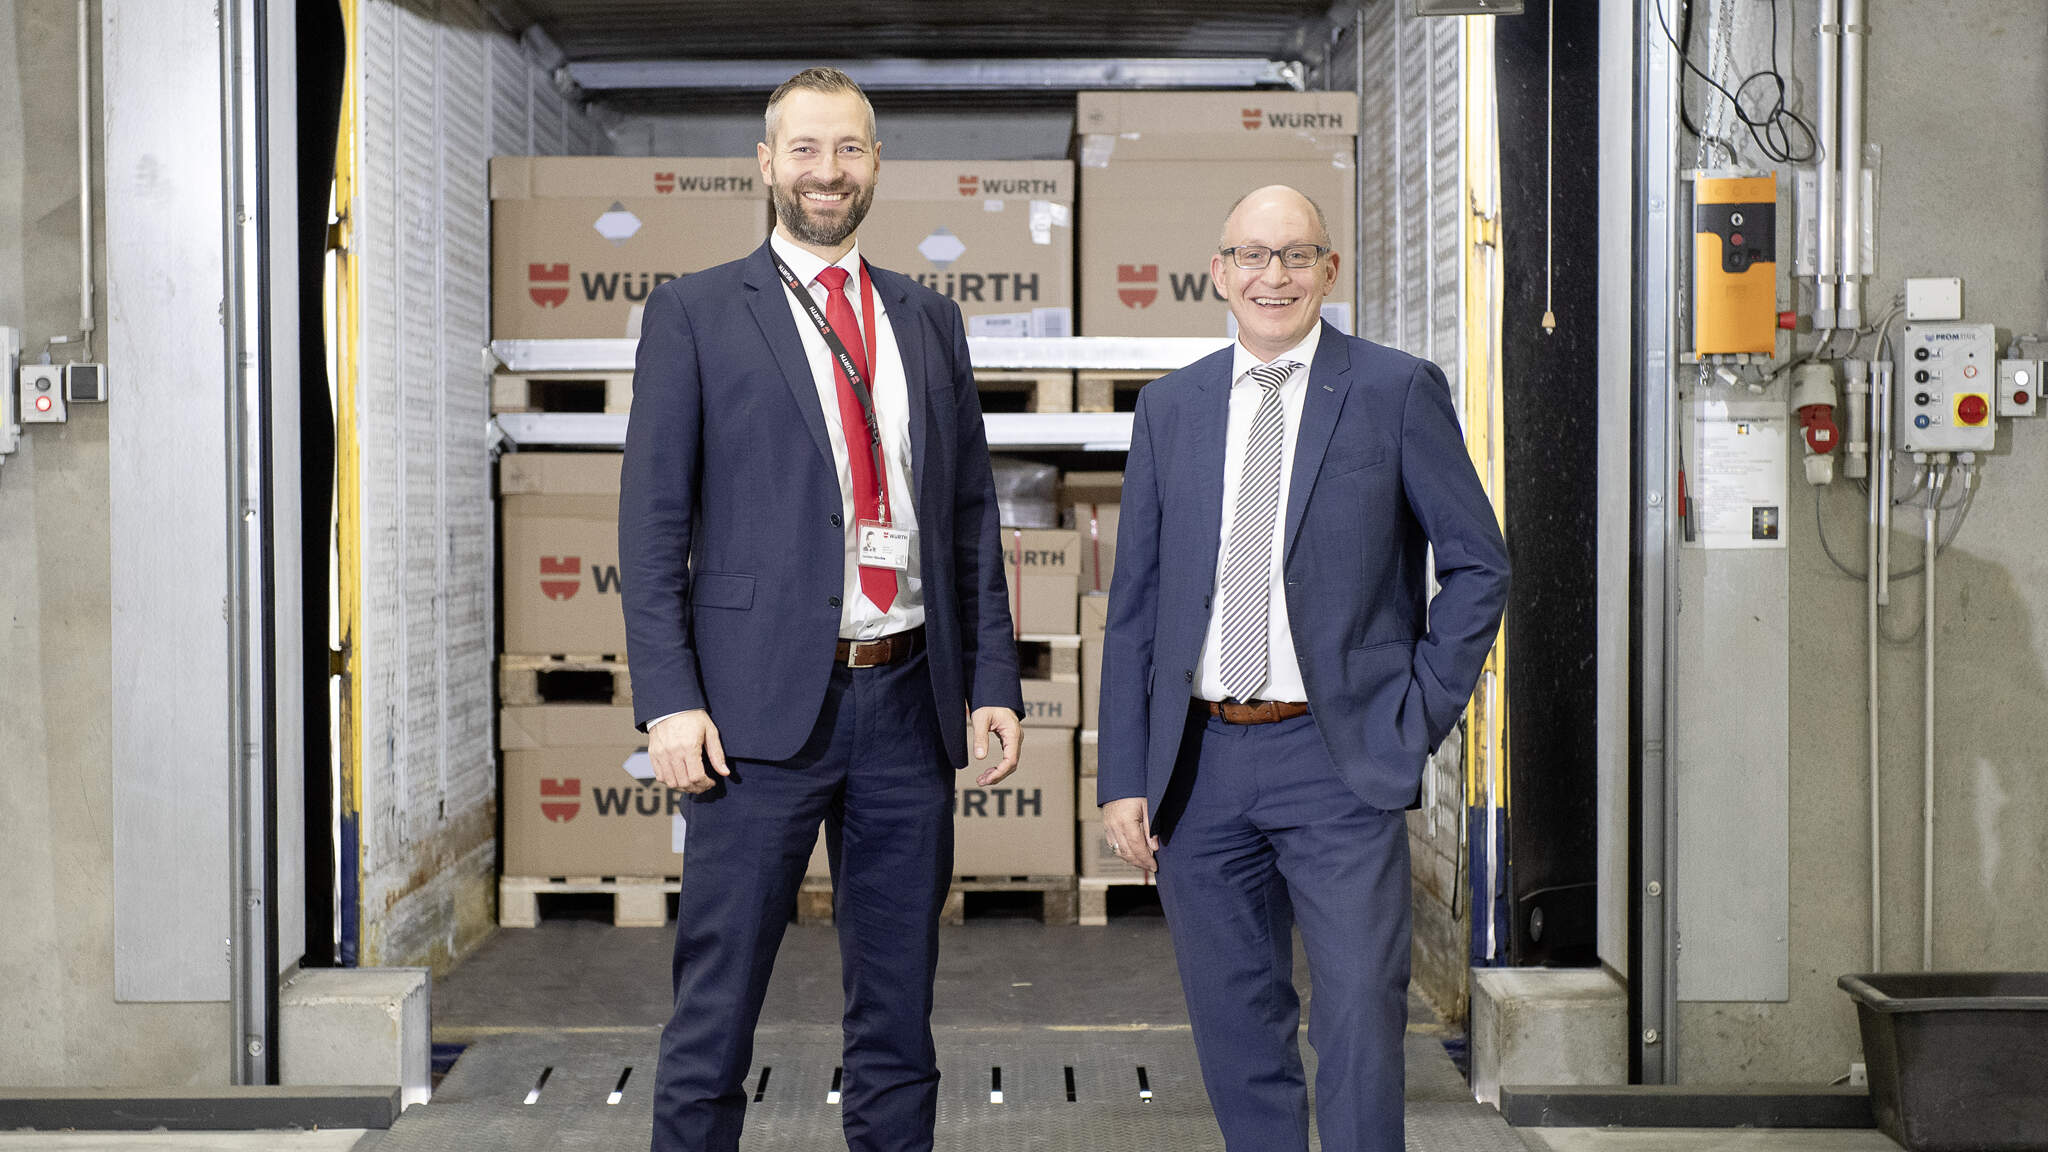 From left to right: Jochen Höschle, in charge of the supply chain for Adolf Würht GmbH & Co. KG, and Marc-Oliver Bohlender, DACHSER brand manager in Öhringen